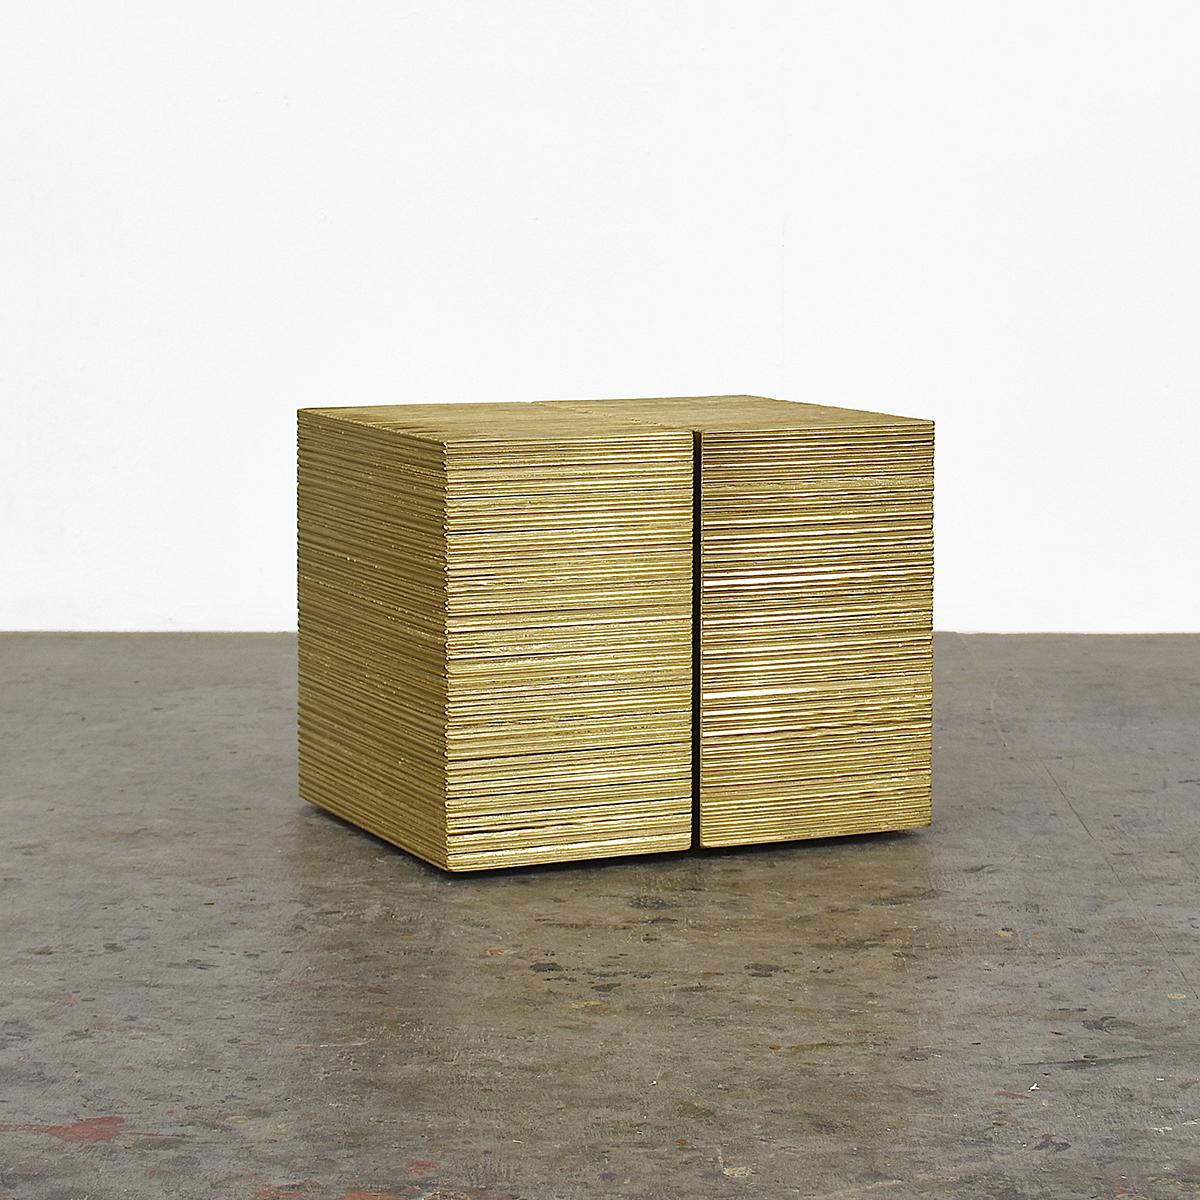 ORO - OS1 stool by John Eric Byers
ORO Collection
Dimensions: W 38 x D 51 x H 38cm
Materials: maple hardwood + gold metallic lacquer 

hand shaped + hand textured + hollow core stacked lamination

John Eric Byers creates geometrically